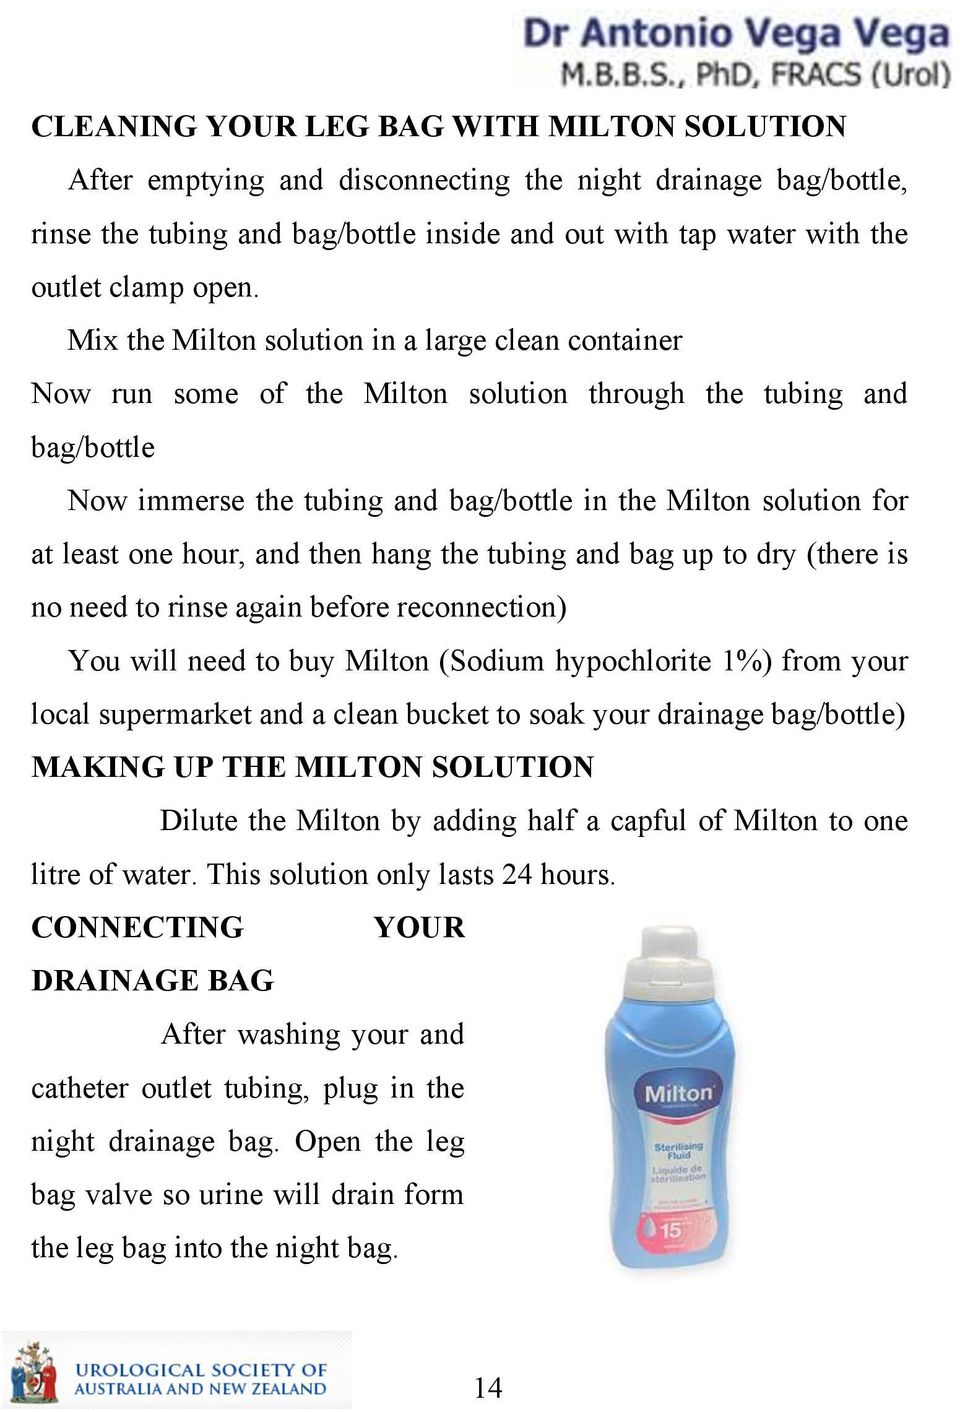 hour, and then hang the tubing and bag up to dry (there is no need to rinse again before reconnection) You will need to buy Milton (Sodium hypochlorite 1%) from your local supermarket and a clean